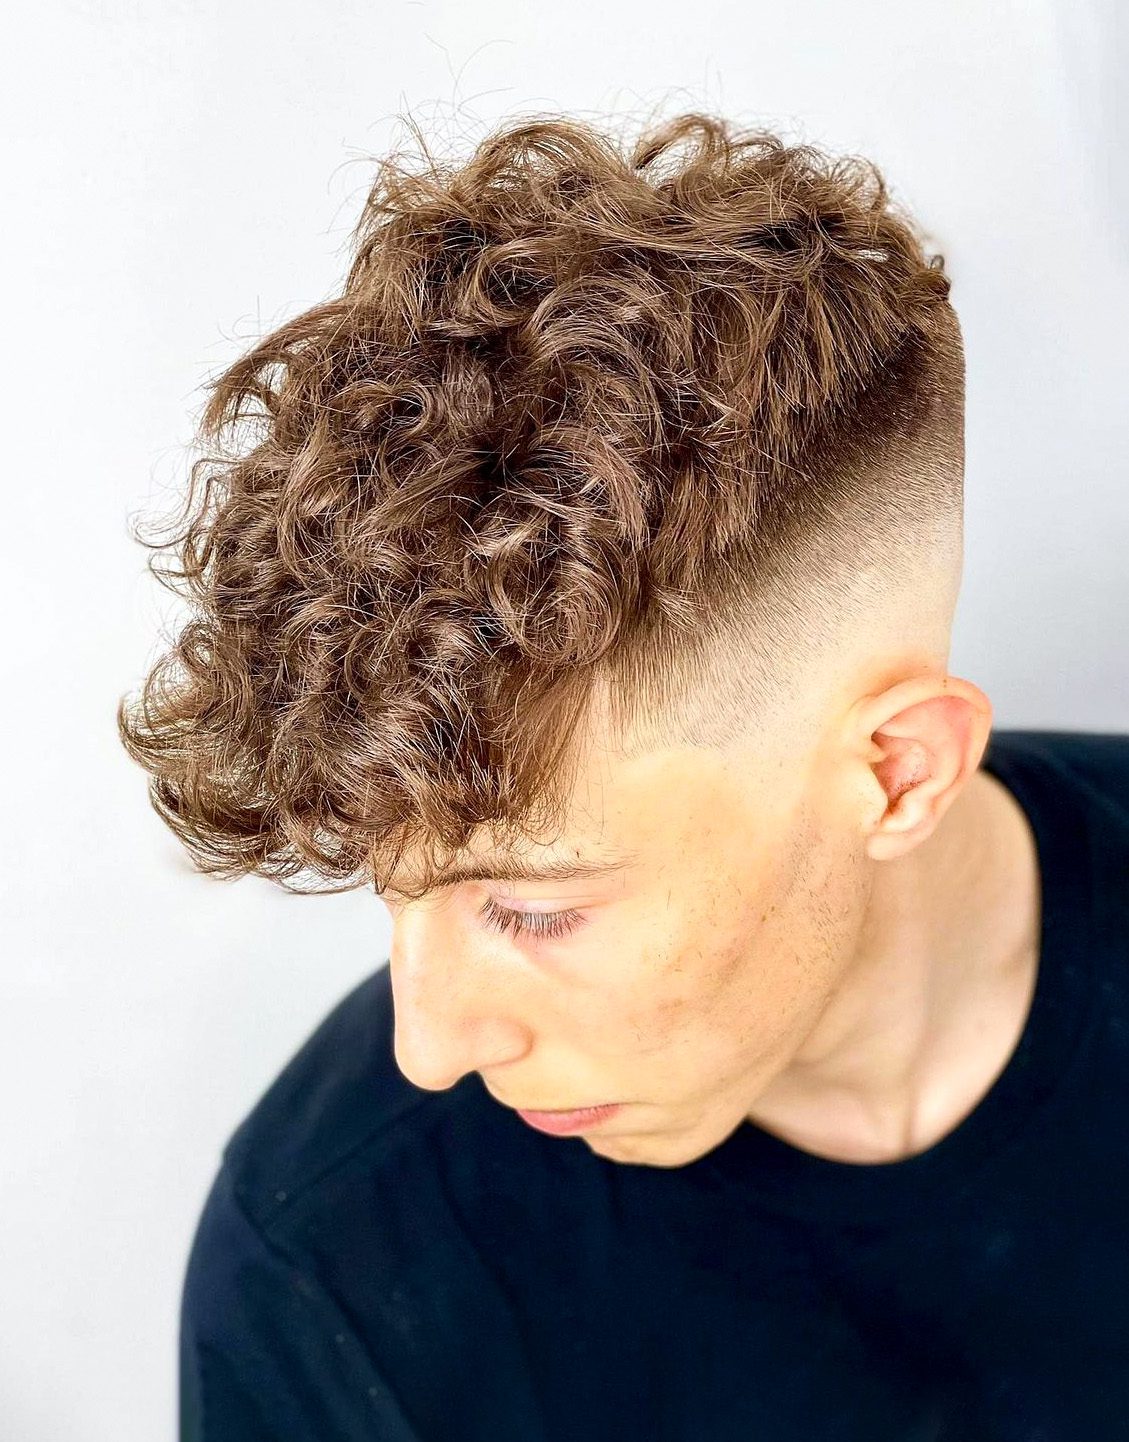 High bald fade with curls